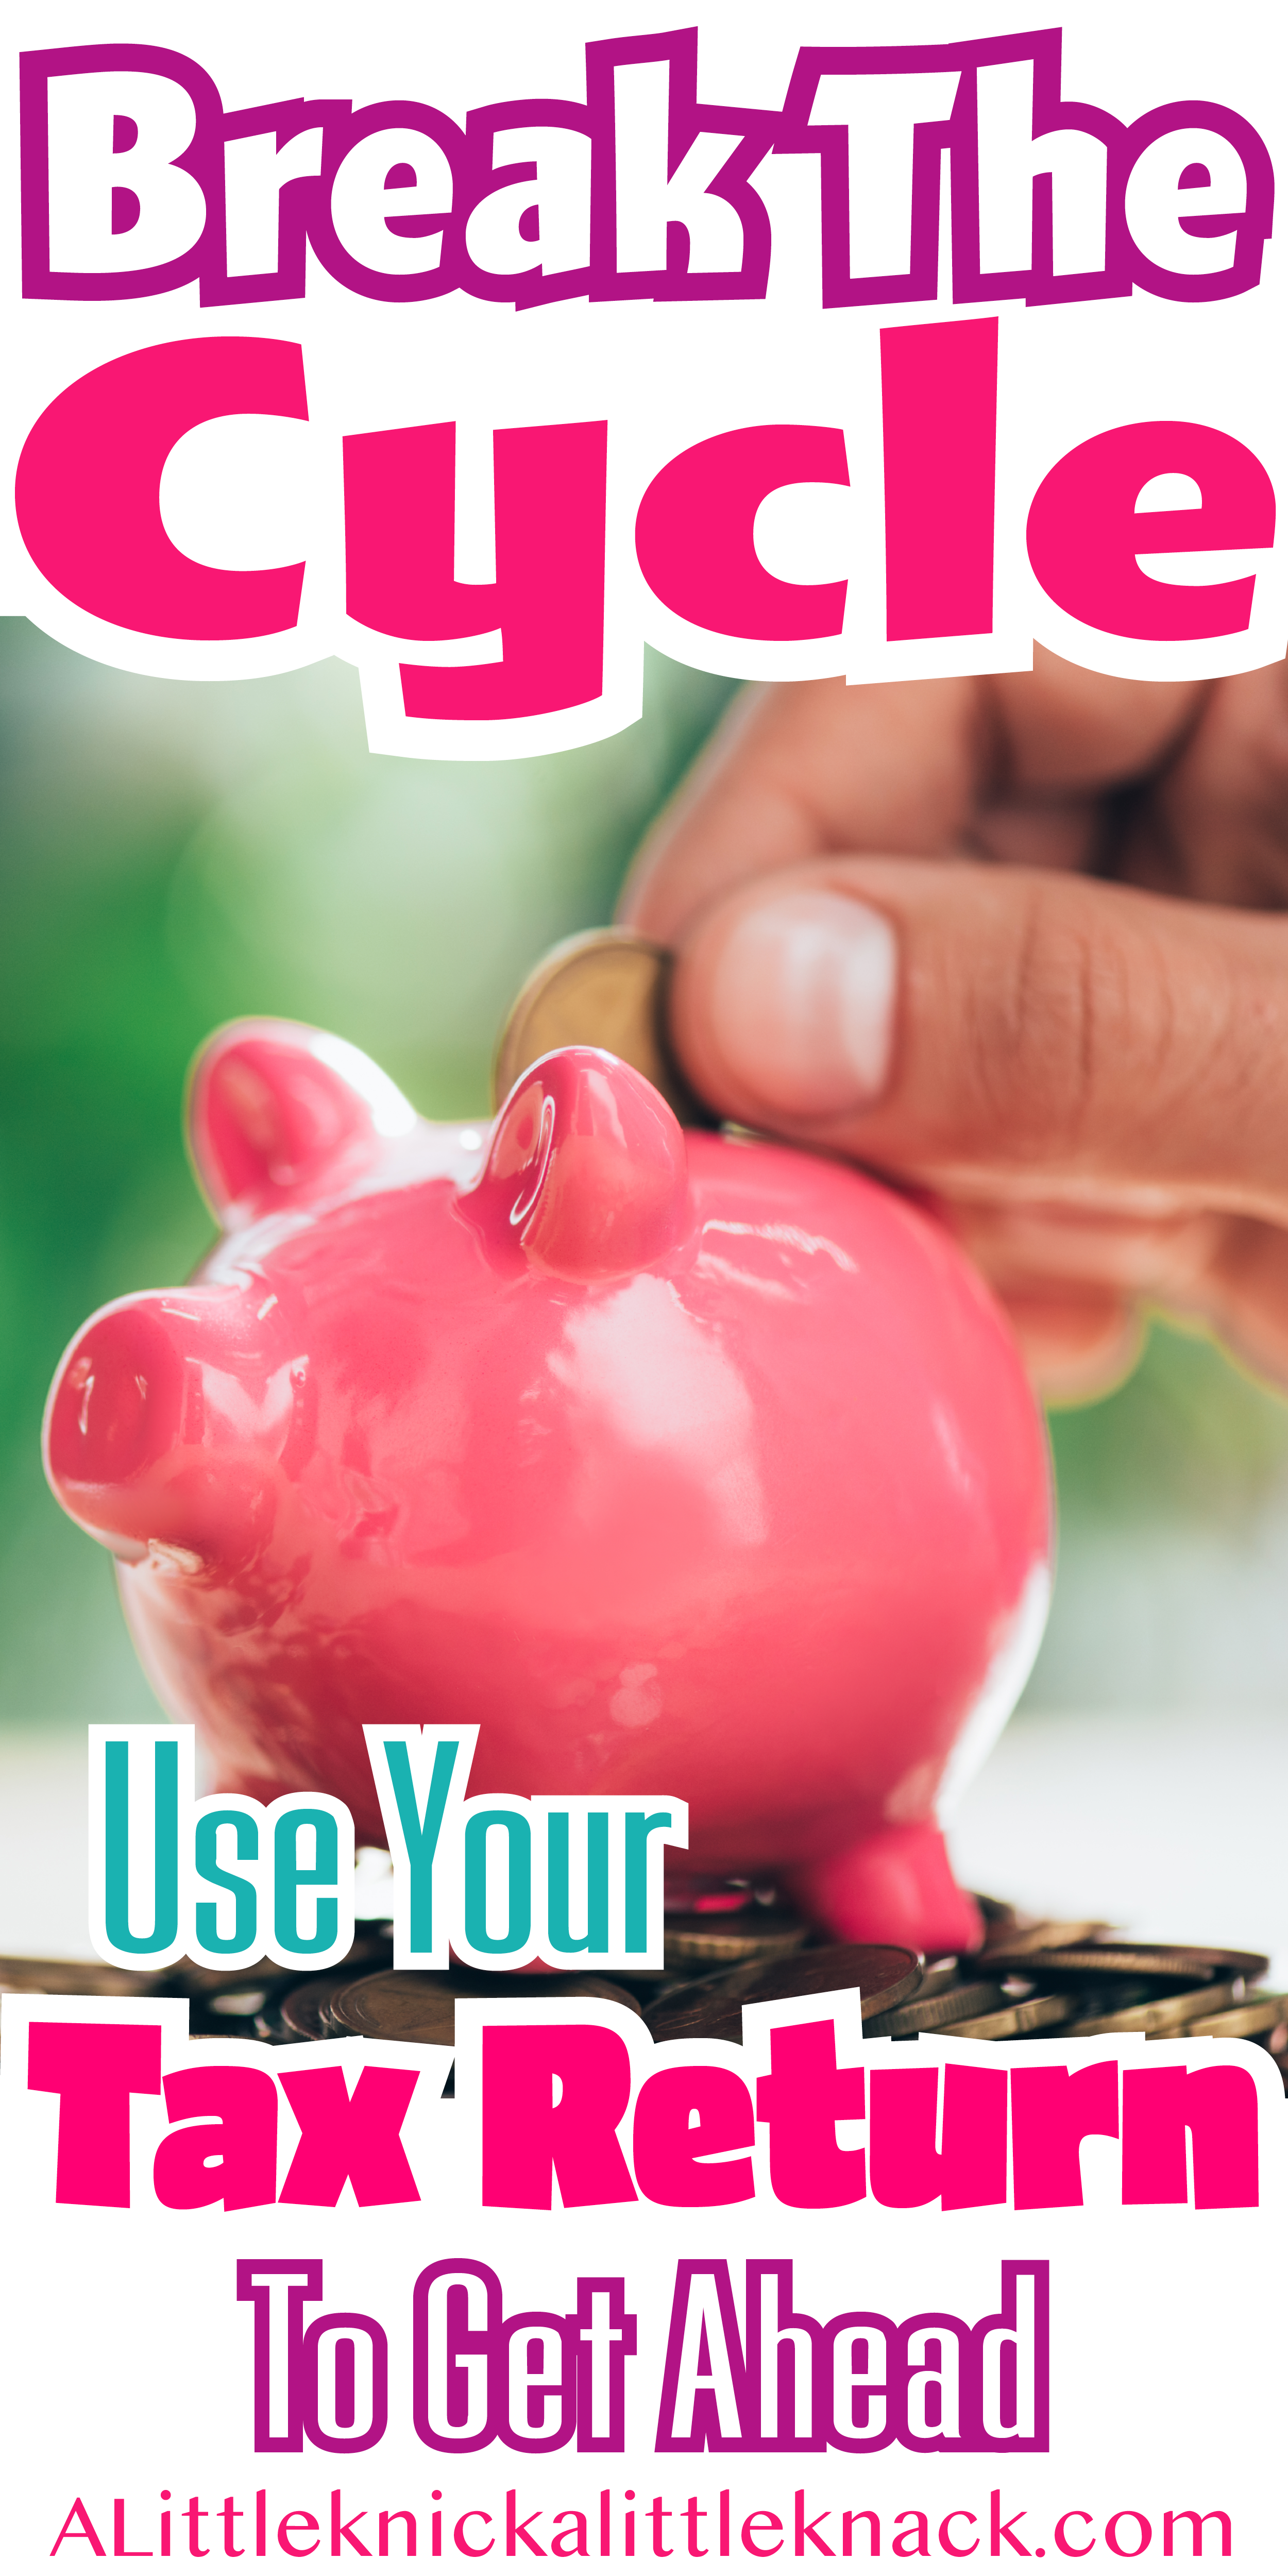 A coin being inserted into a pink piggy bank with text overlay